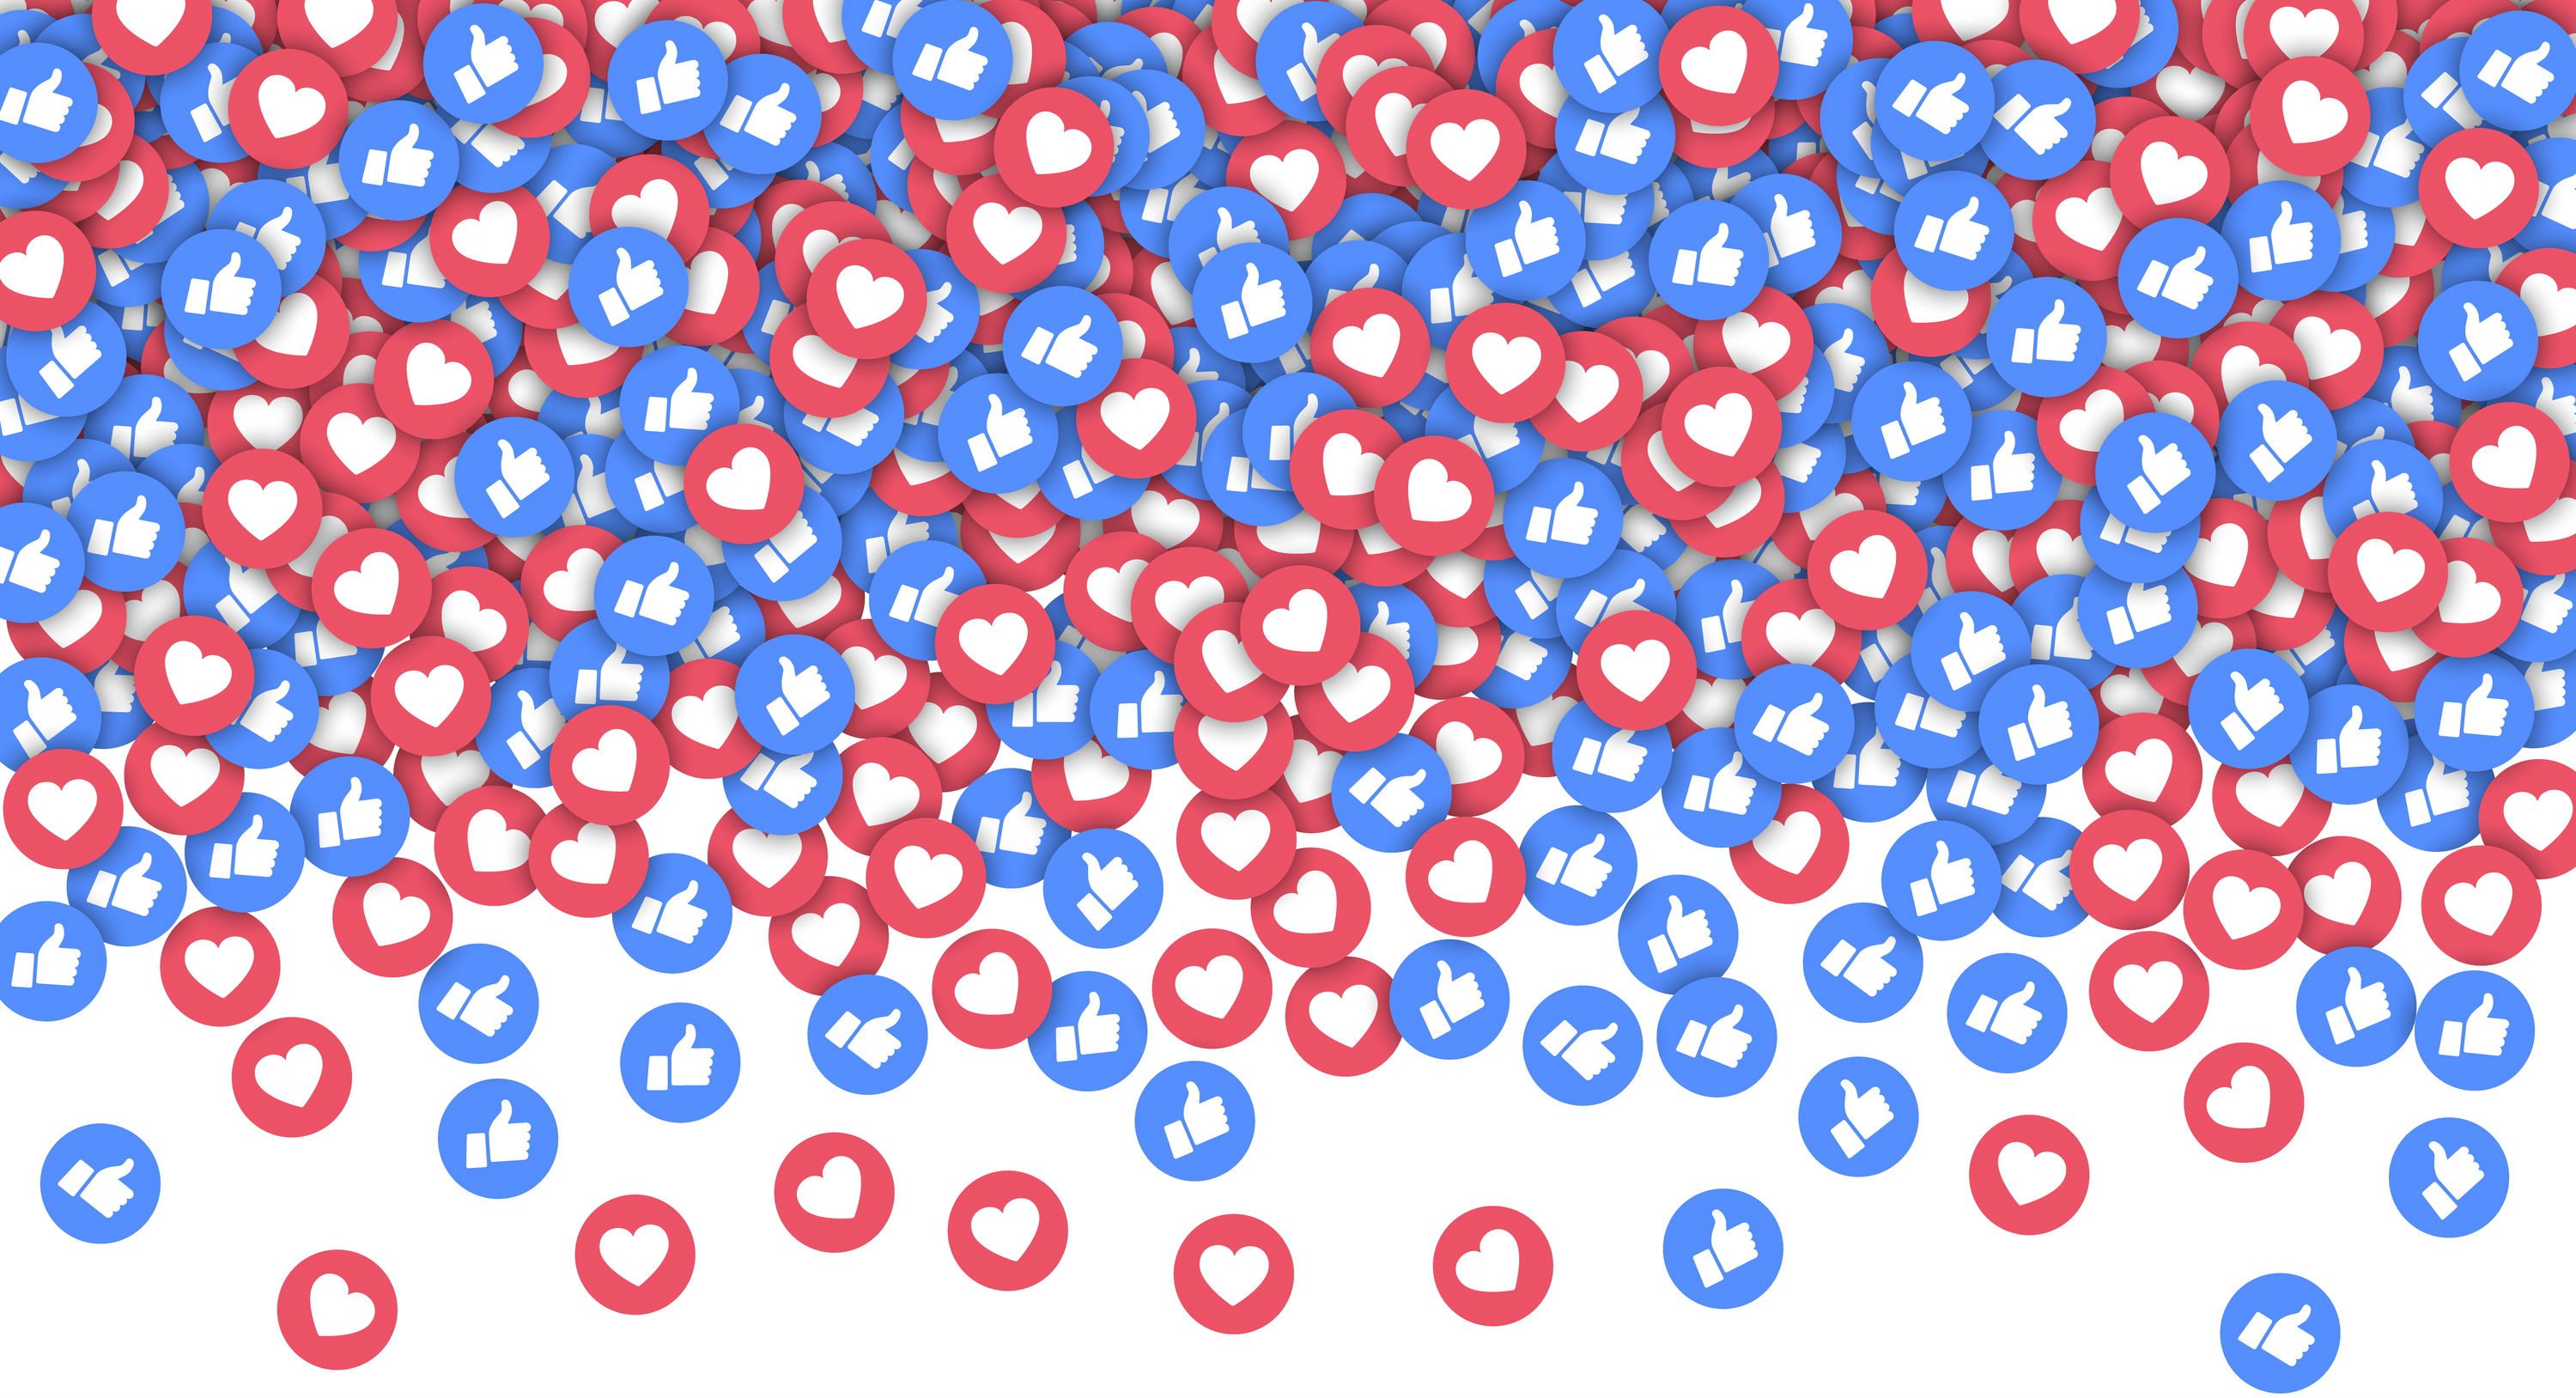 facebooks thumbs and hearts in pile